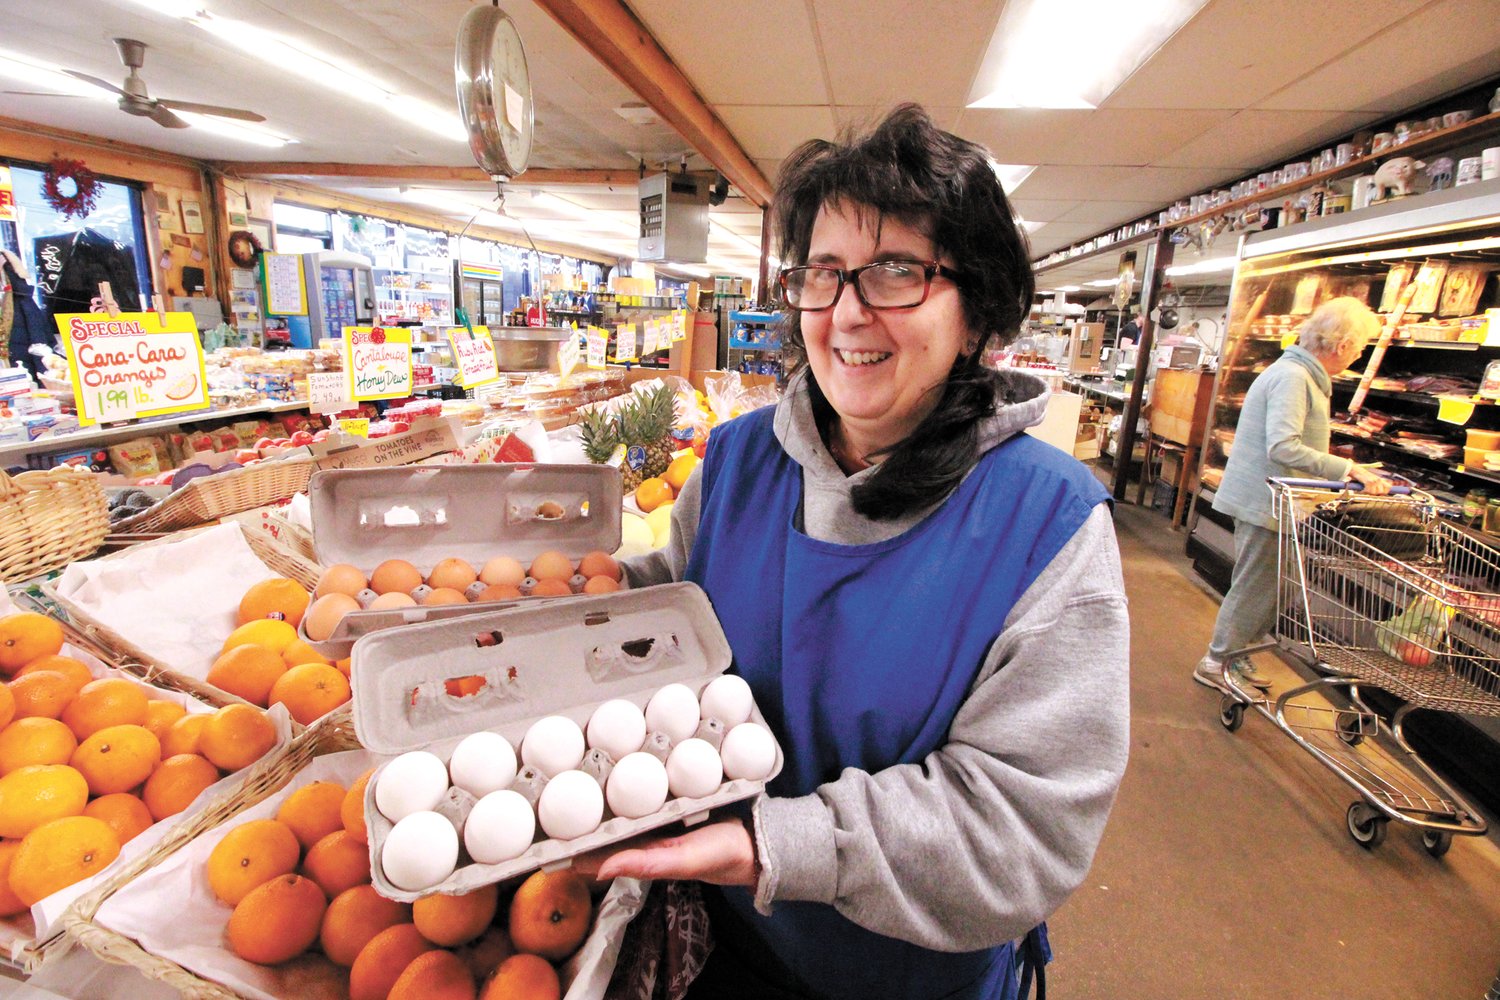 STILL MORE THAN $5 A DOZEN: Annie Meschino of Sandy Lane Meat Market in Warwick finds the higher cost of eggs has slowed sales, but she is hearing from suppliers that prices appear to be softening. (Warwick Beacon photo)